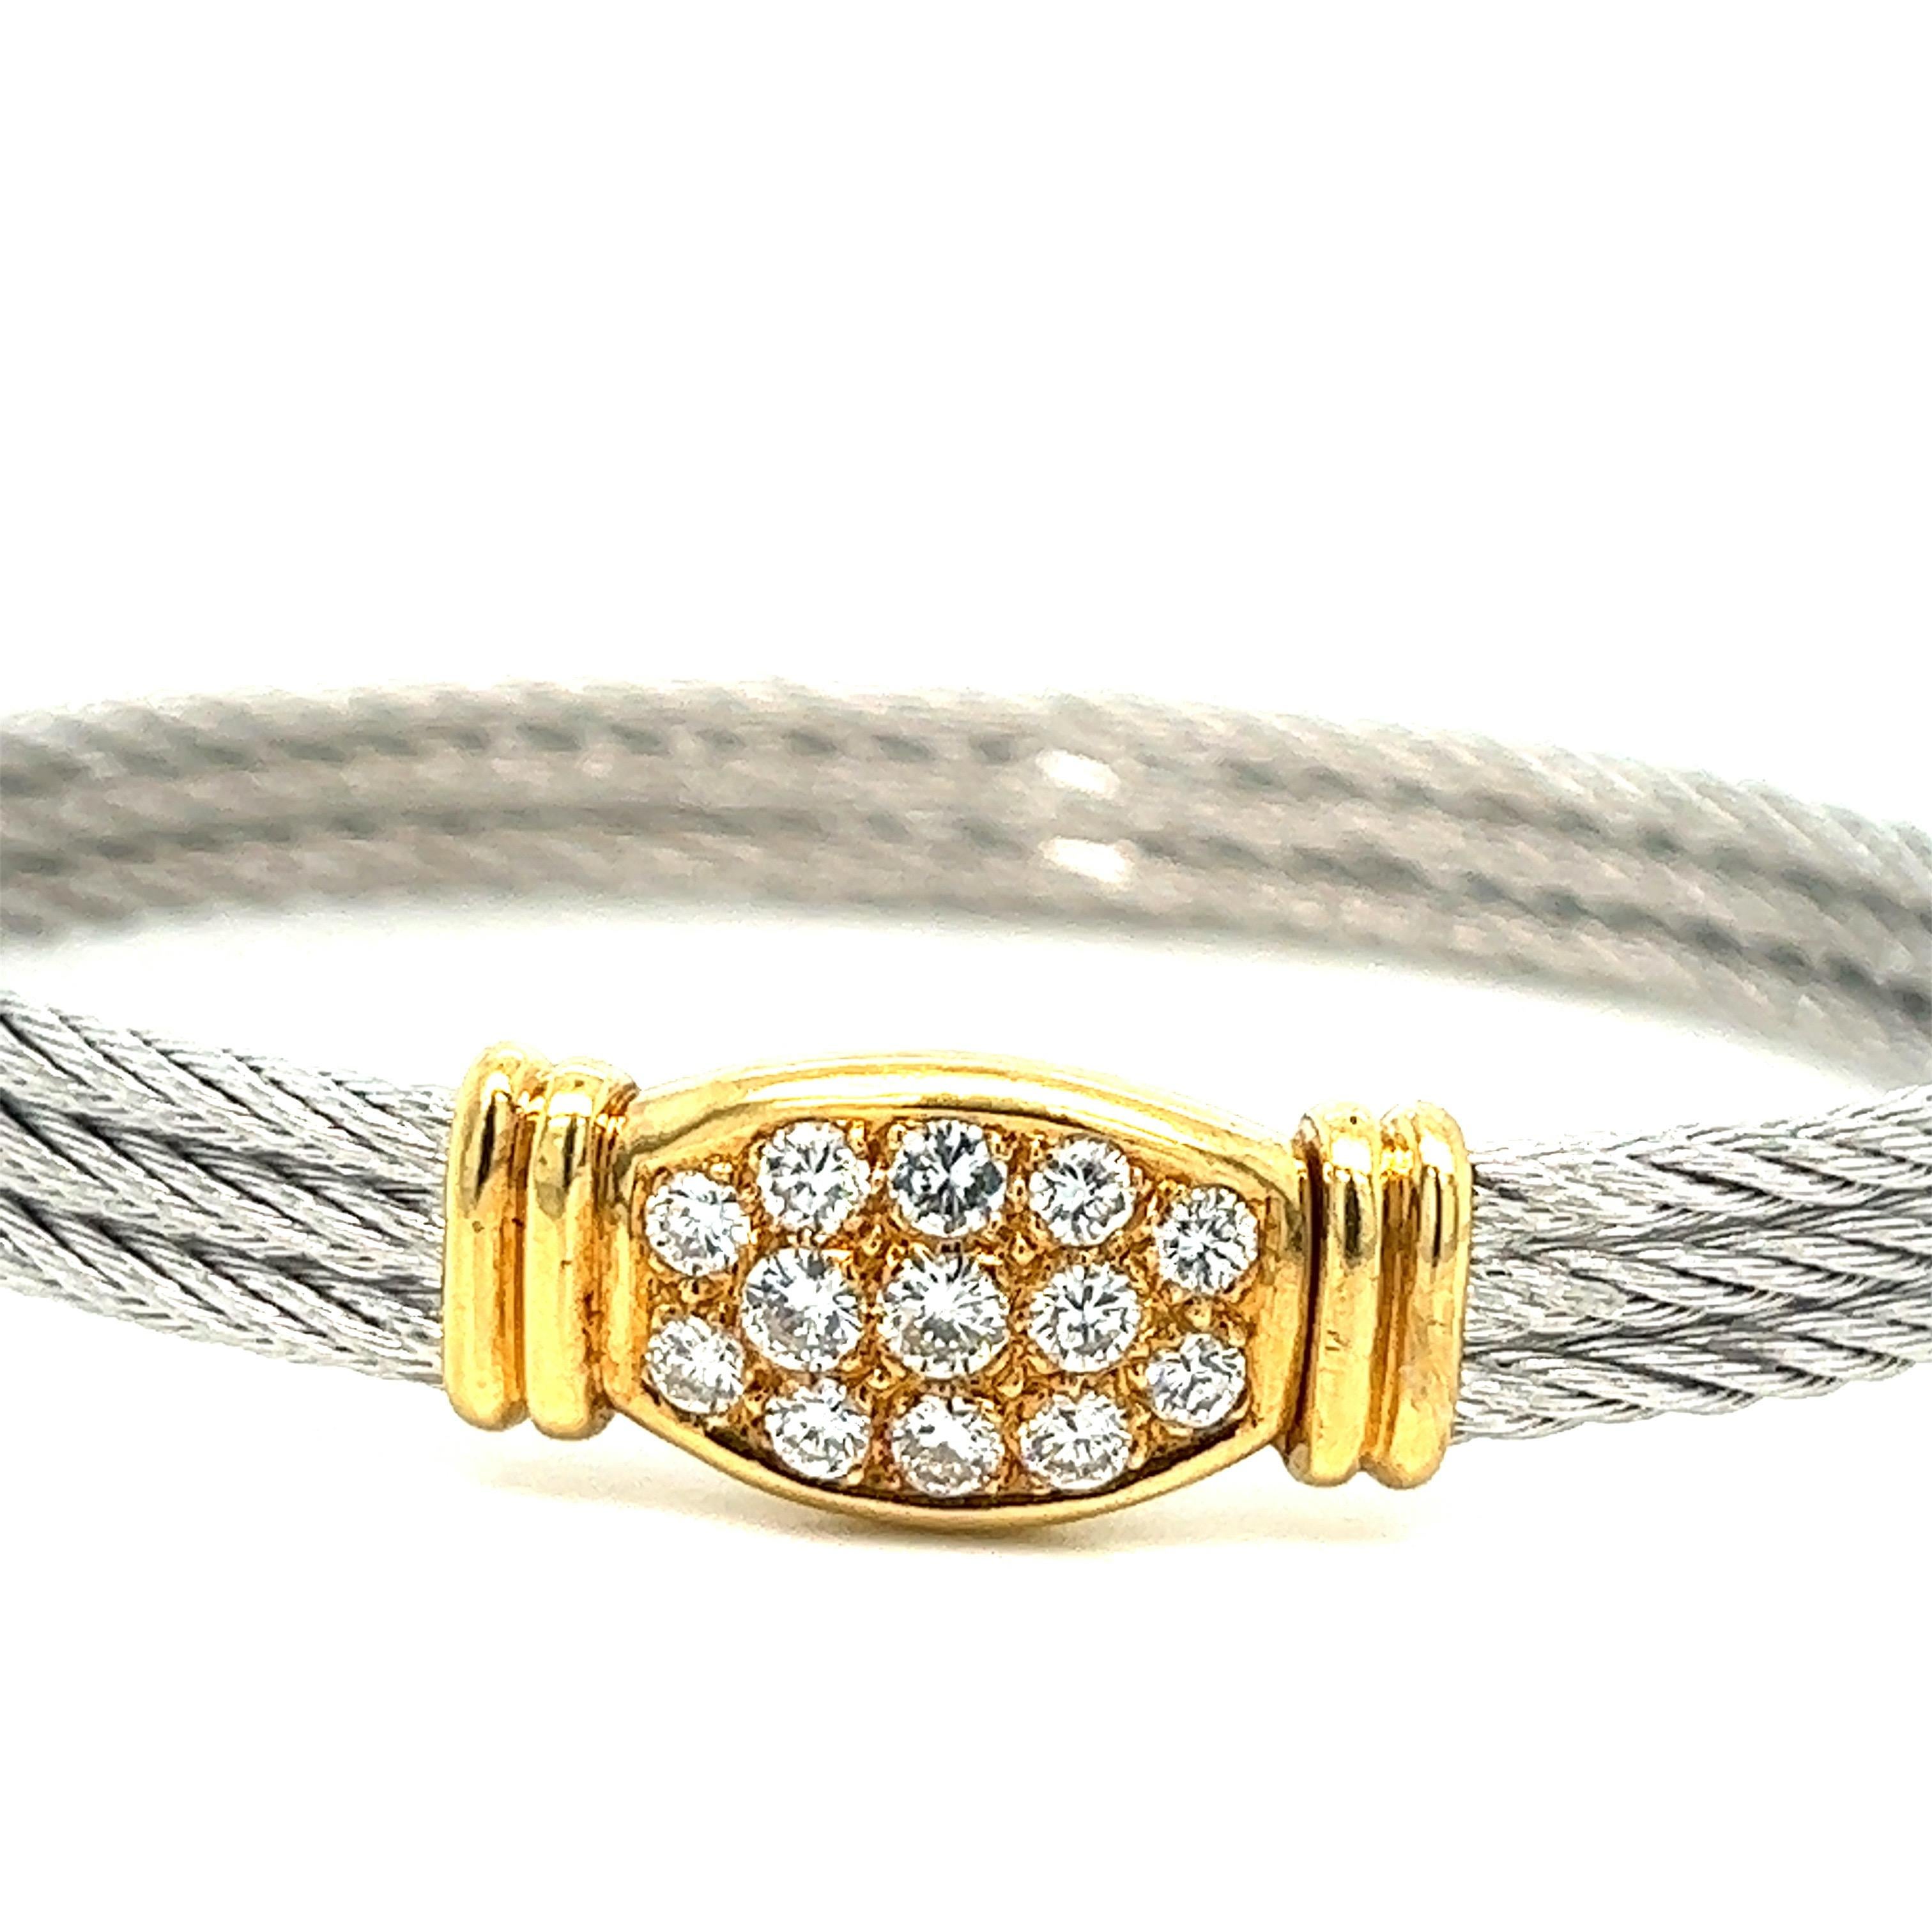 Fred Force 10 bracelet medium model in yellow gold and red cable